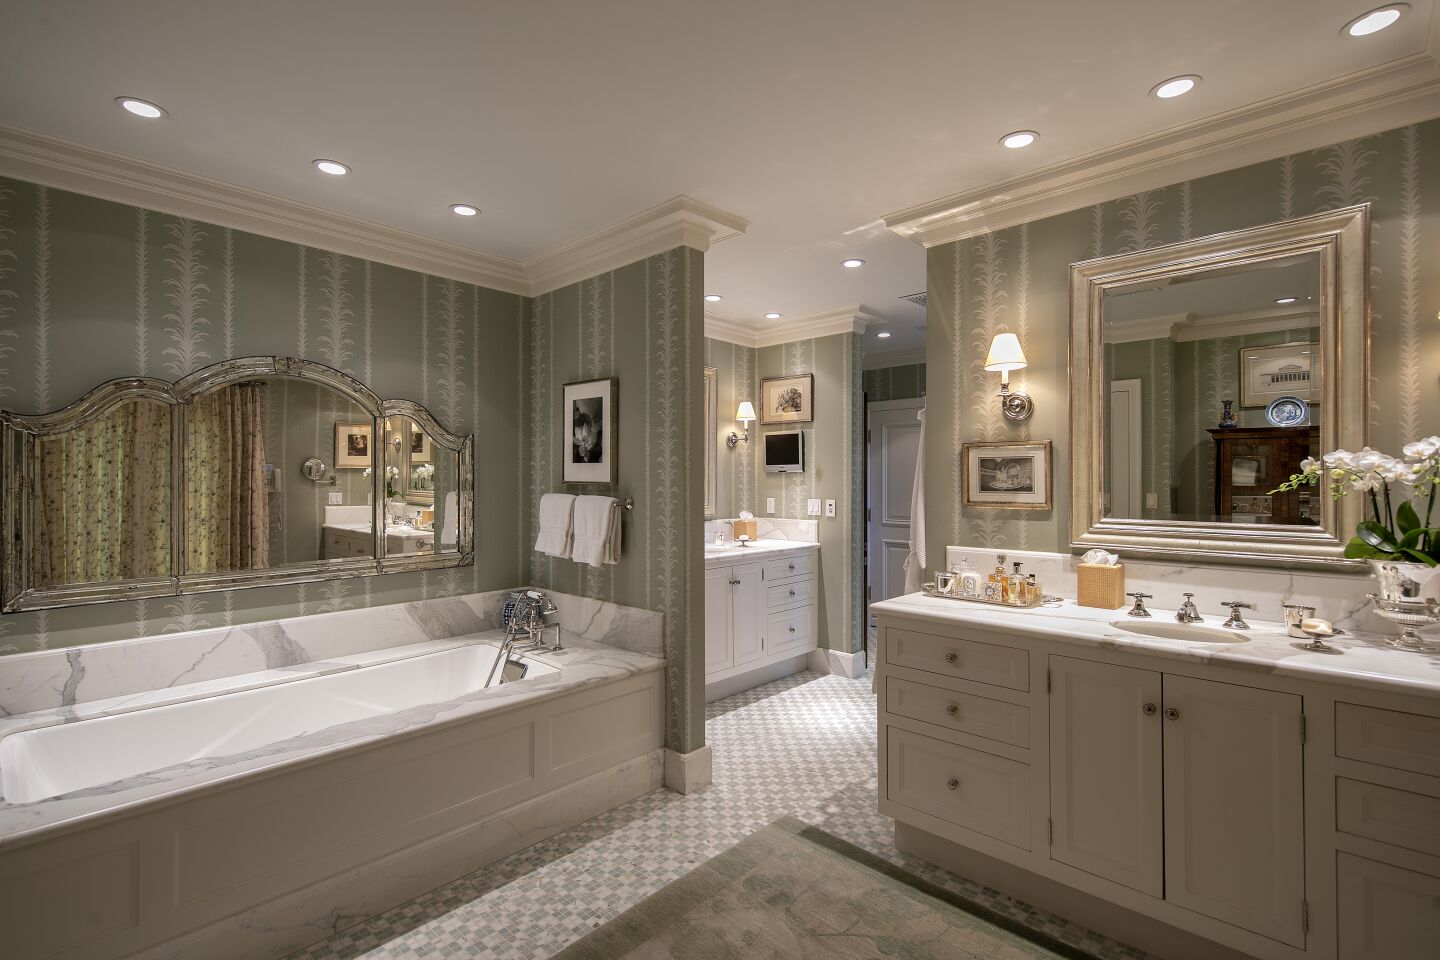 $60-million compound in Beverly Hills: the primary bathroom